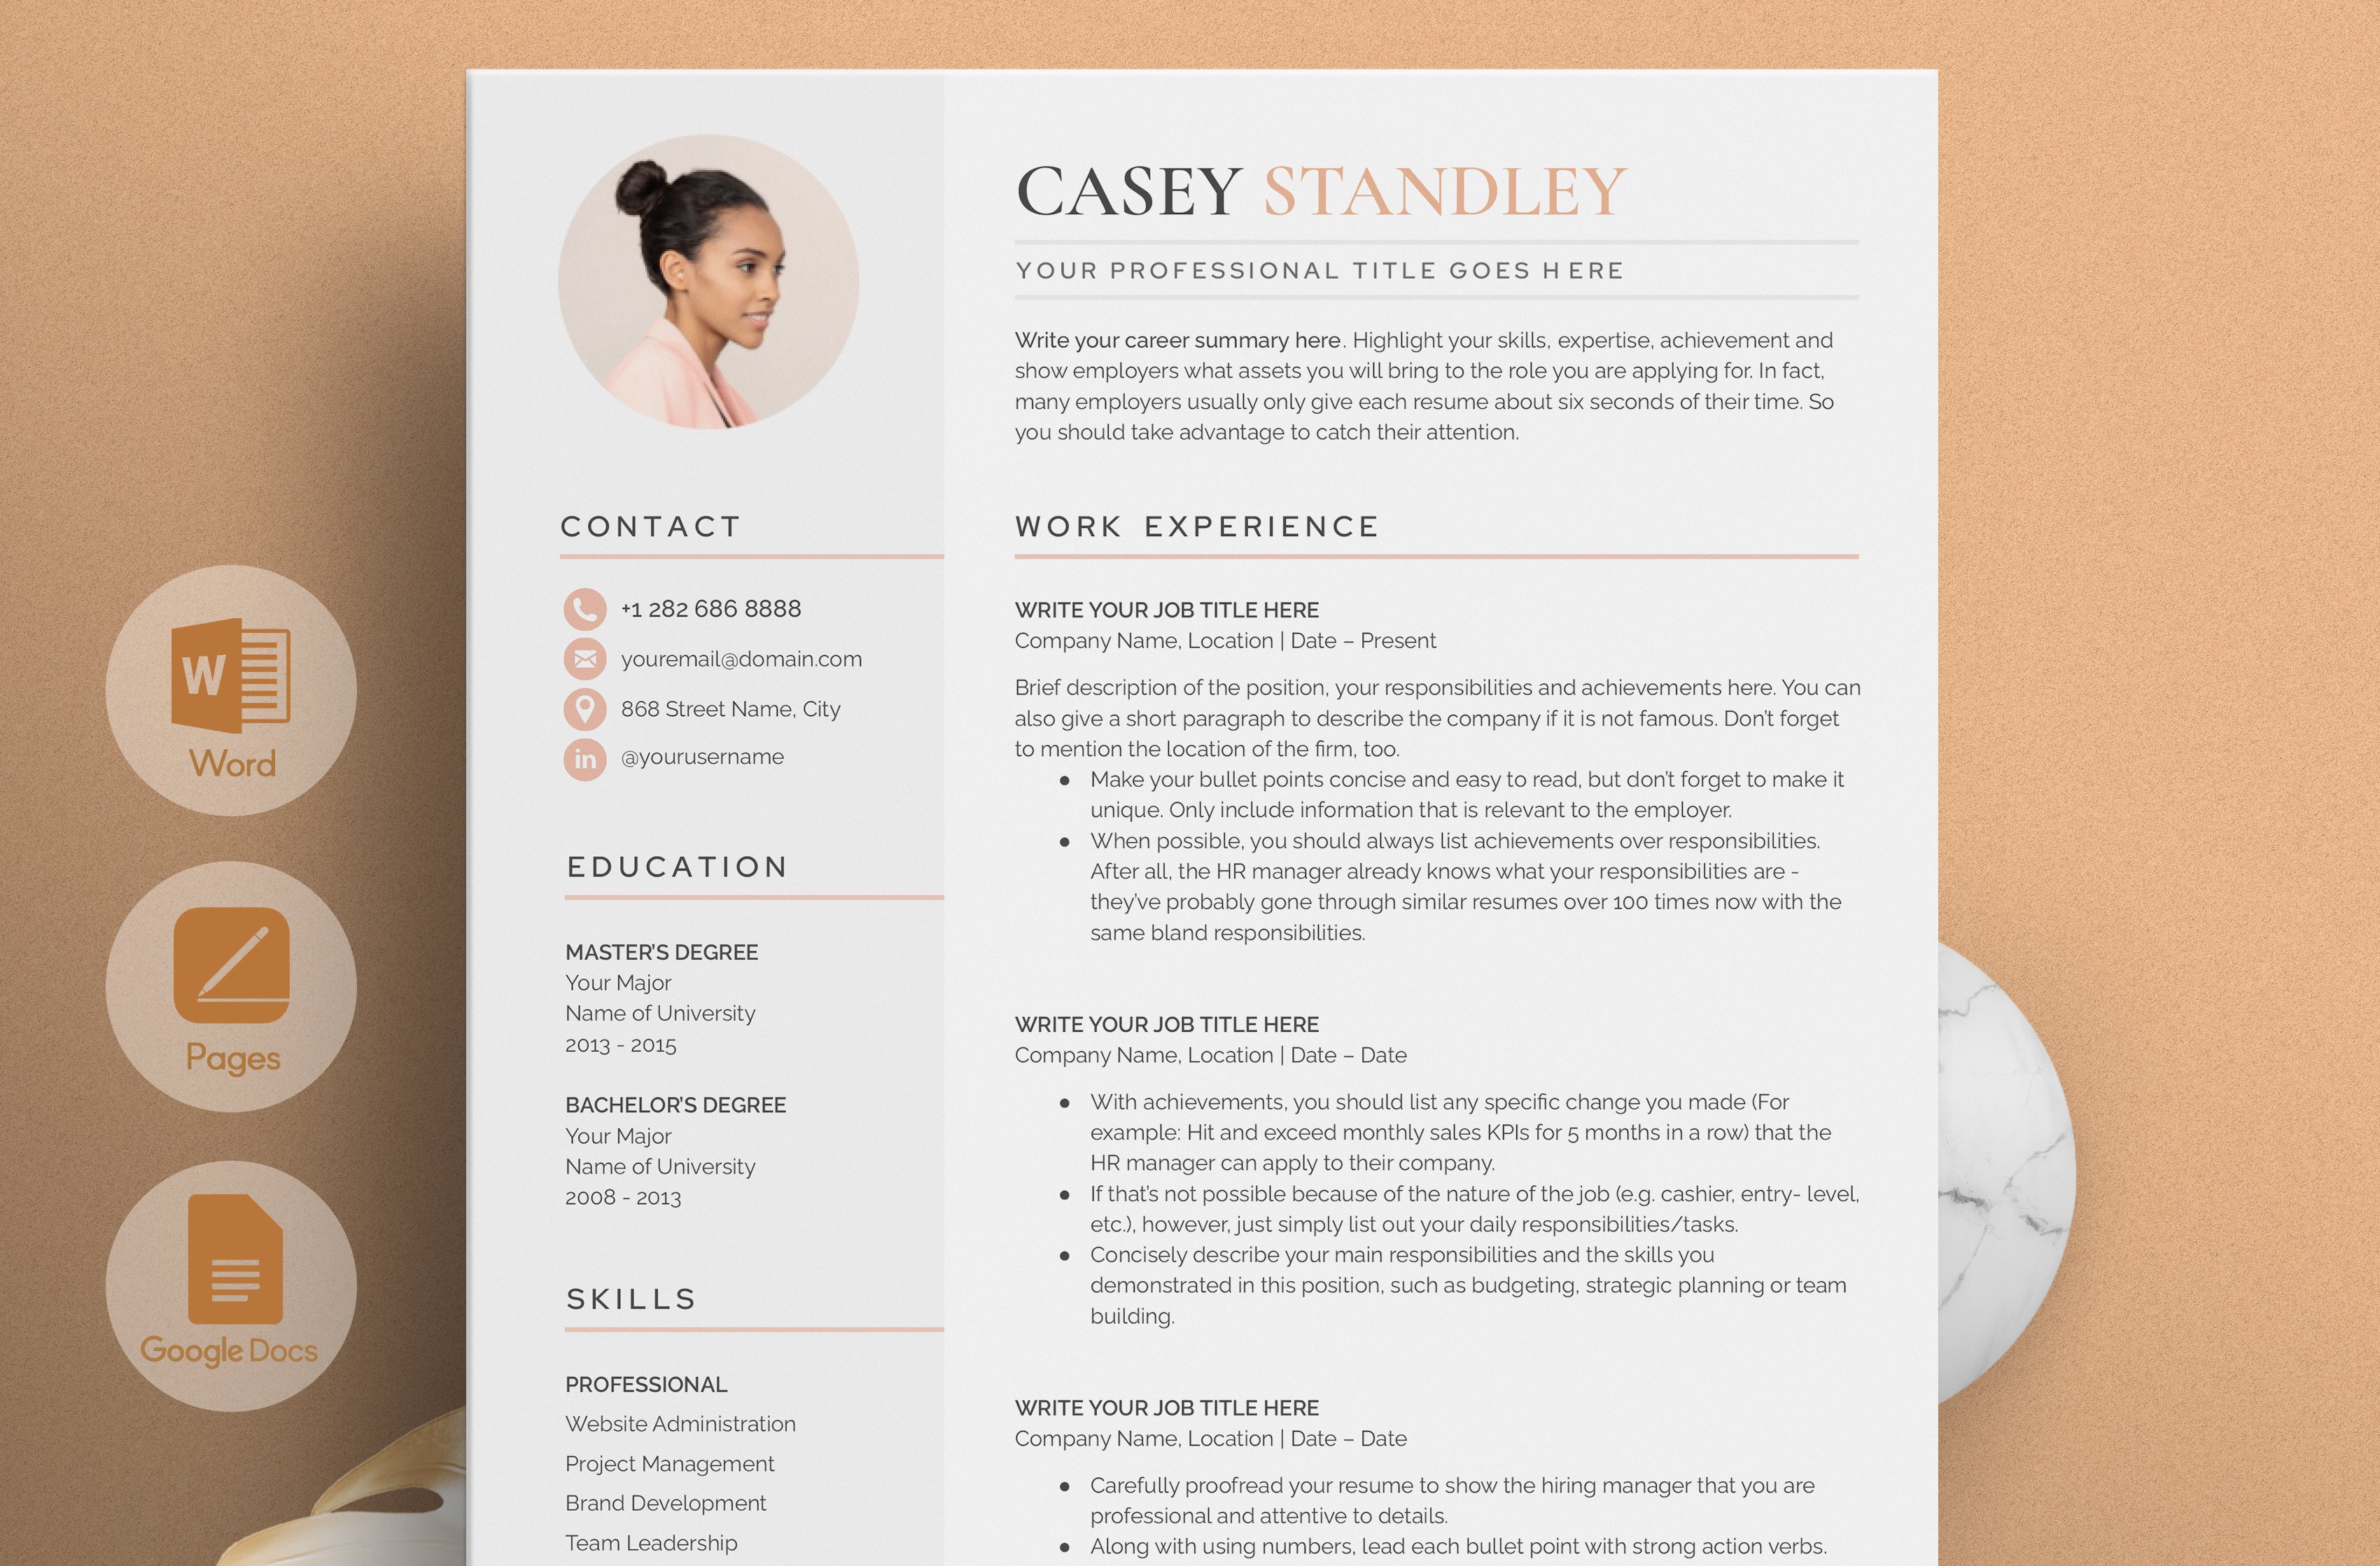 Resume/CV - The Standley cover image.